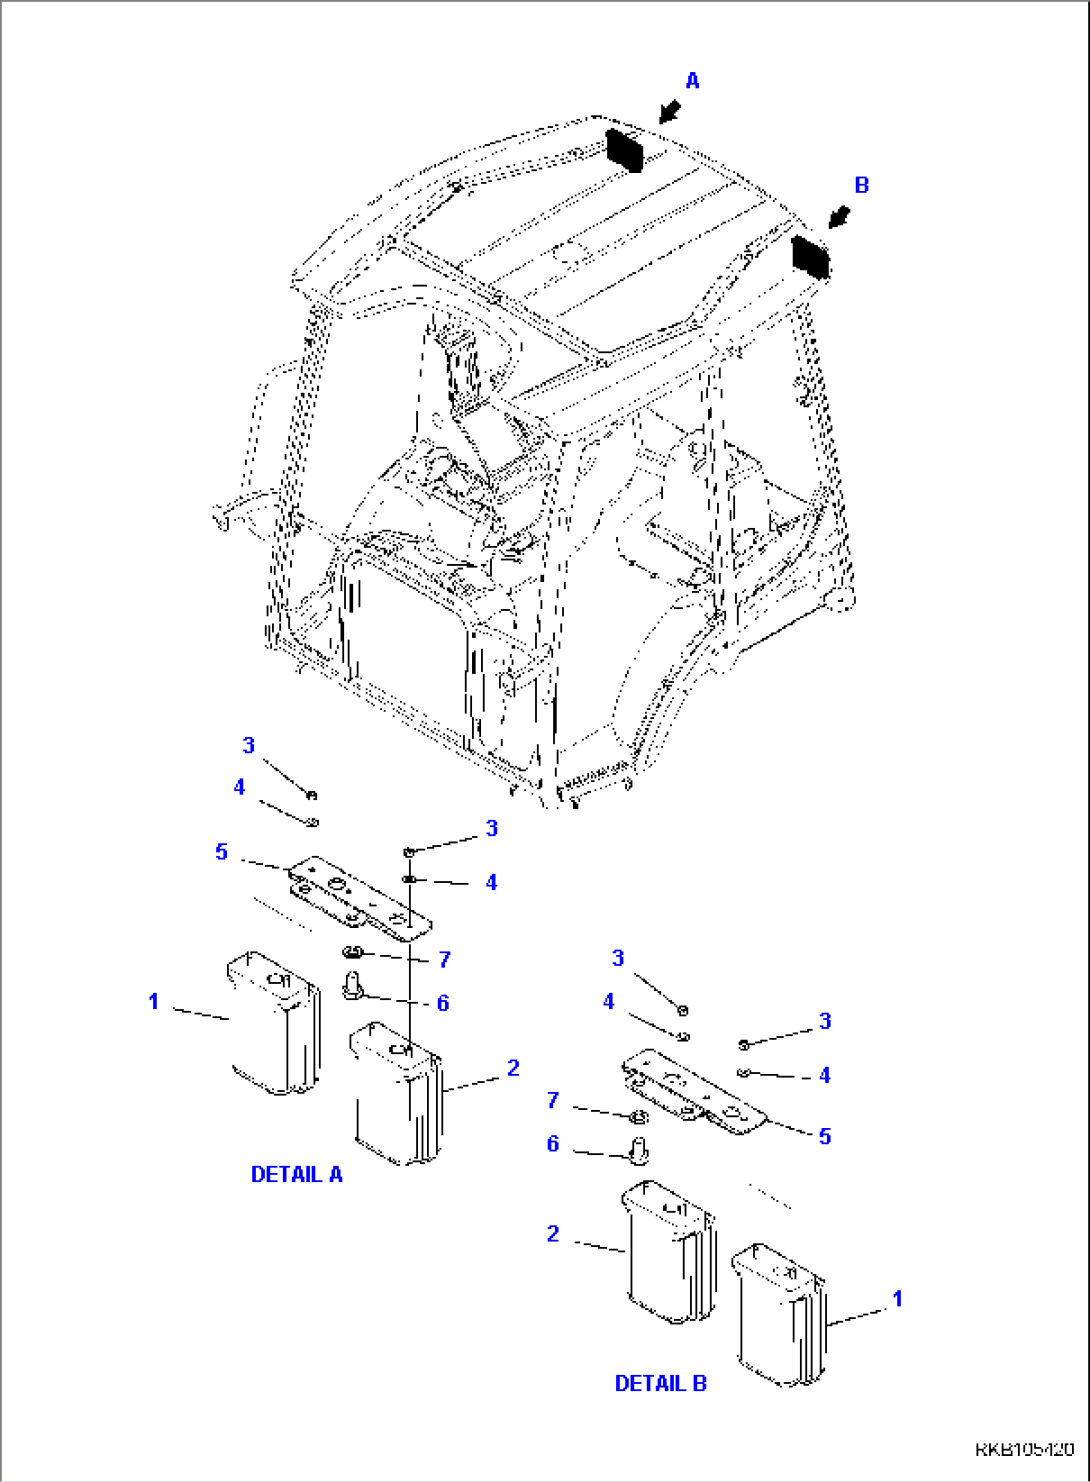 ELECTRICAL SYSTEM (REAR LIGHT)